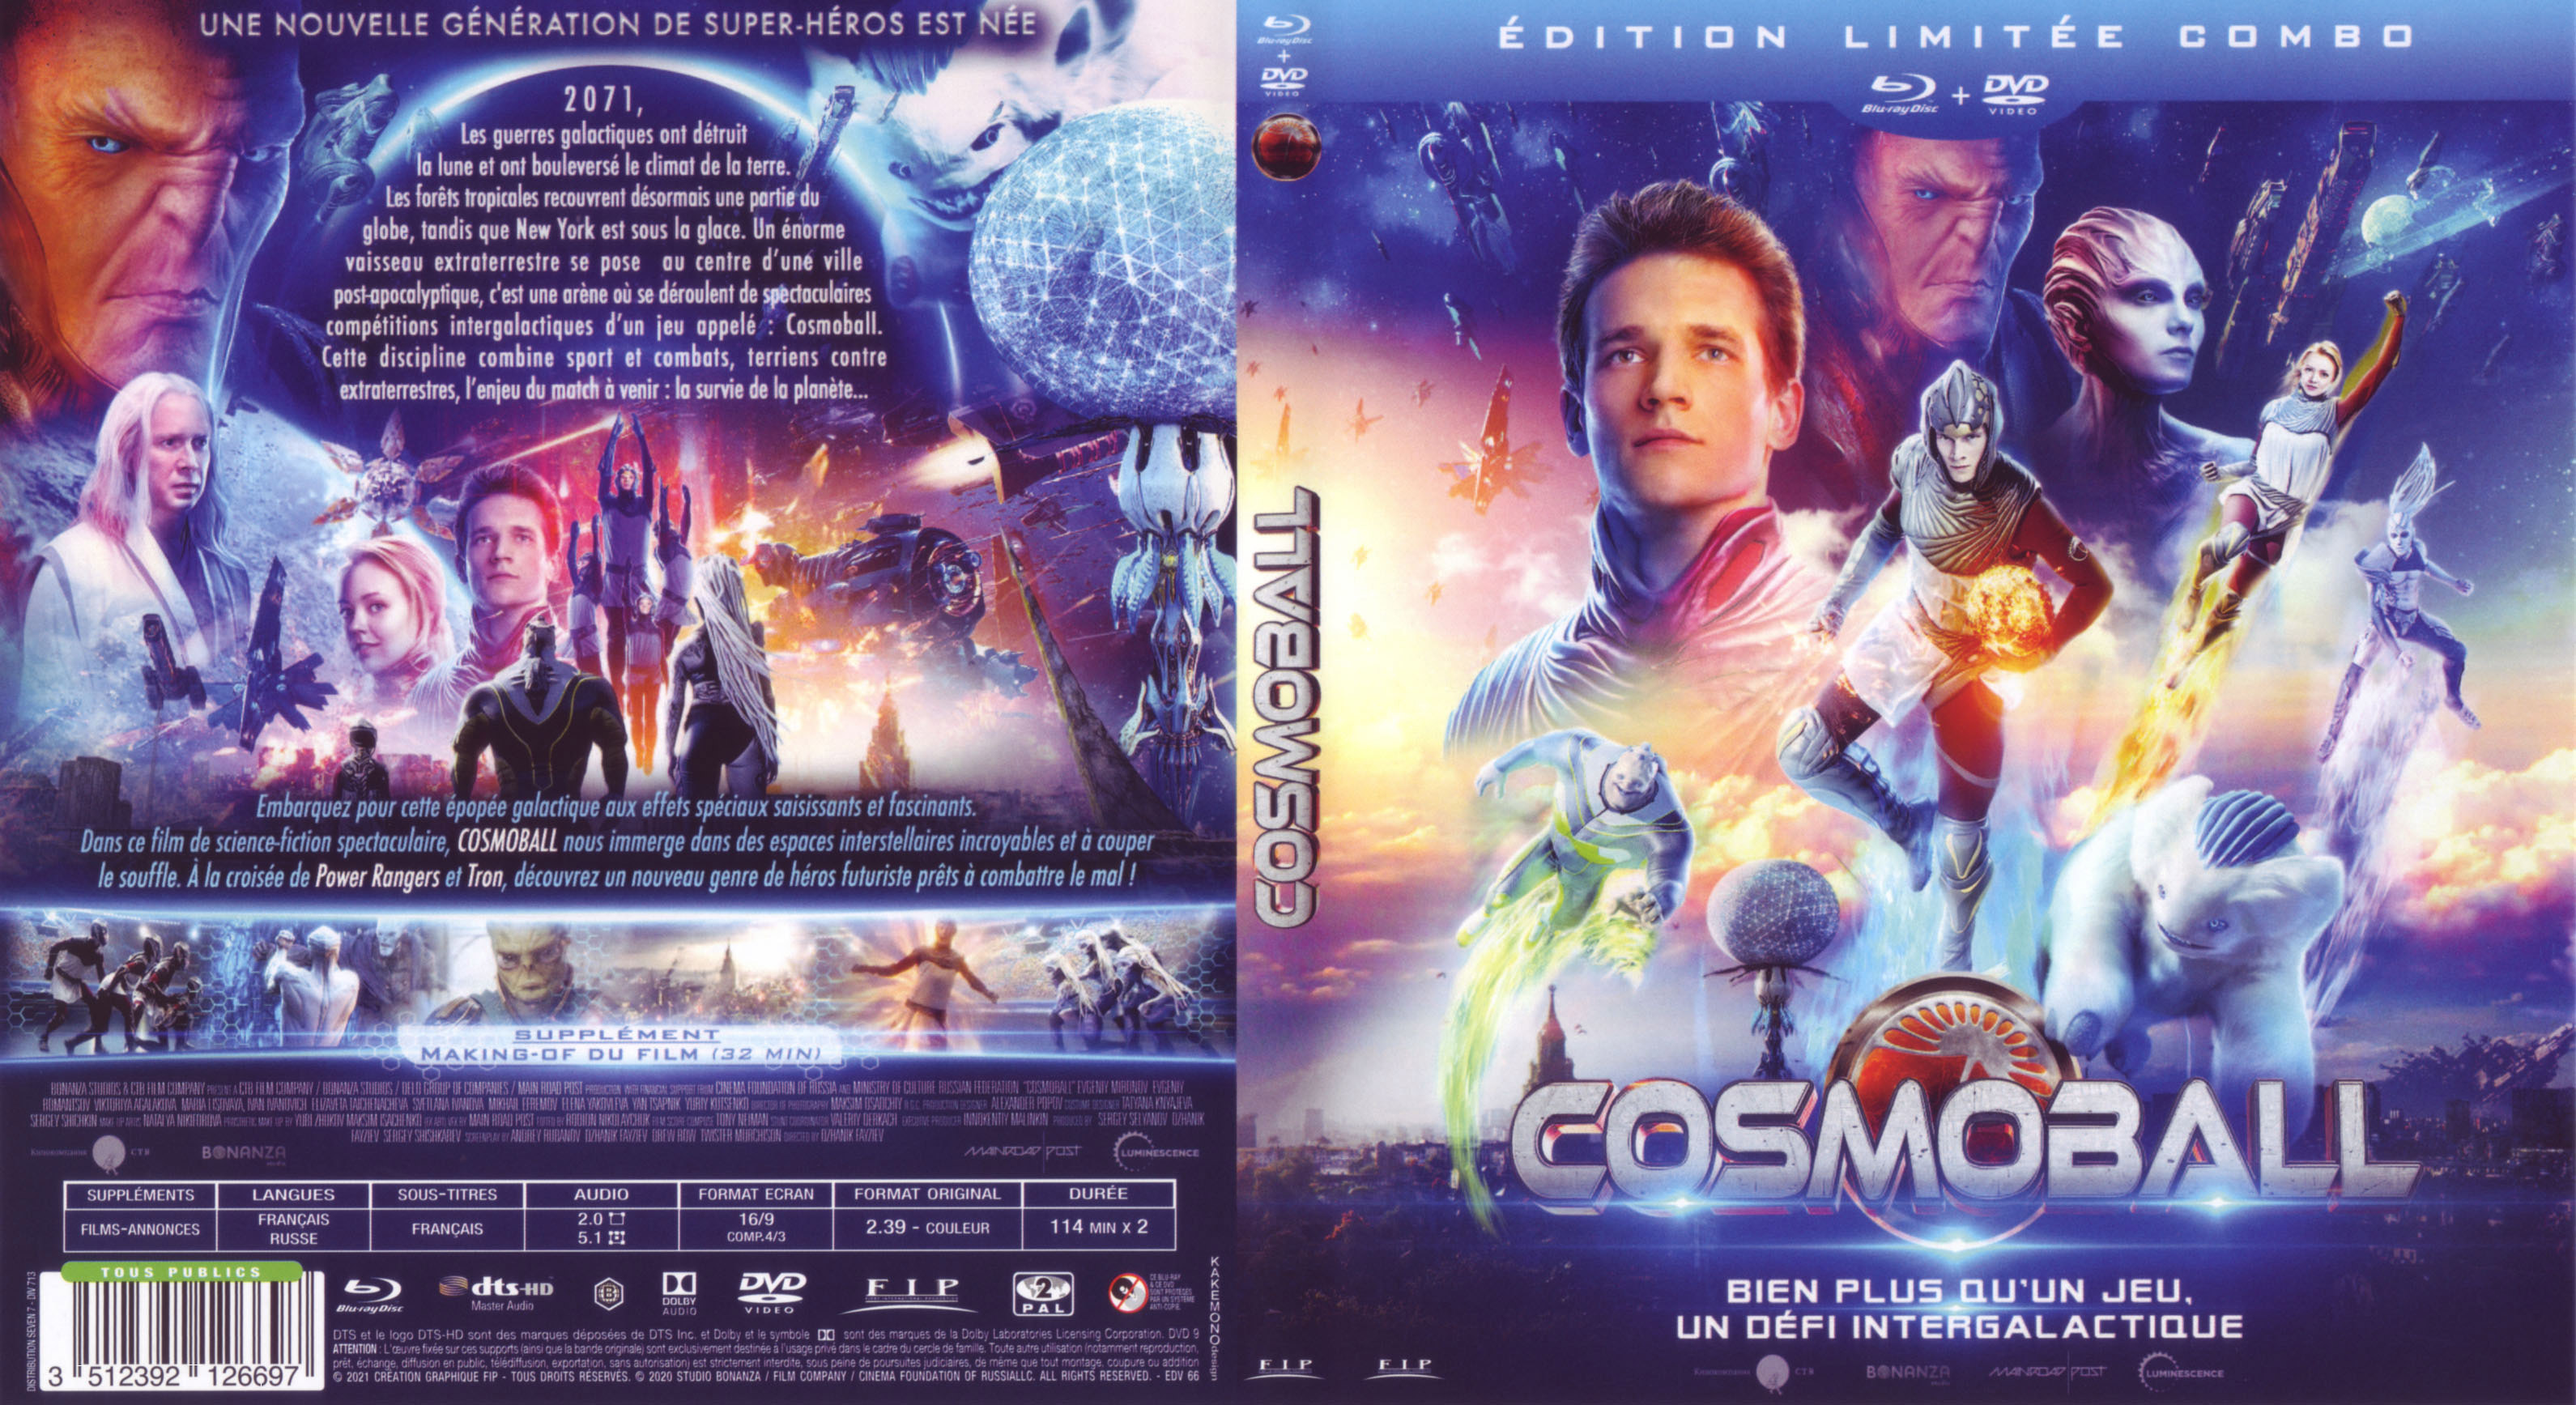 Jaquette DVD Cosmoball (BLU-RAY)